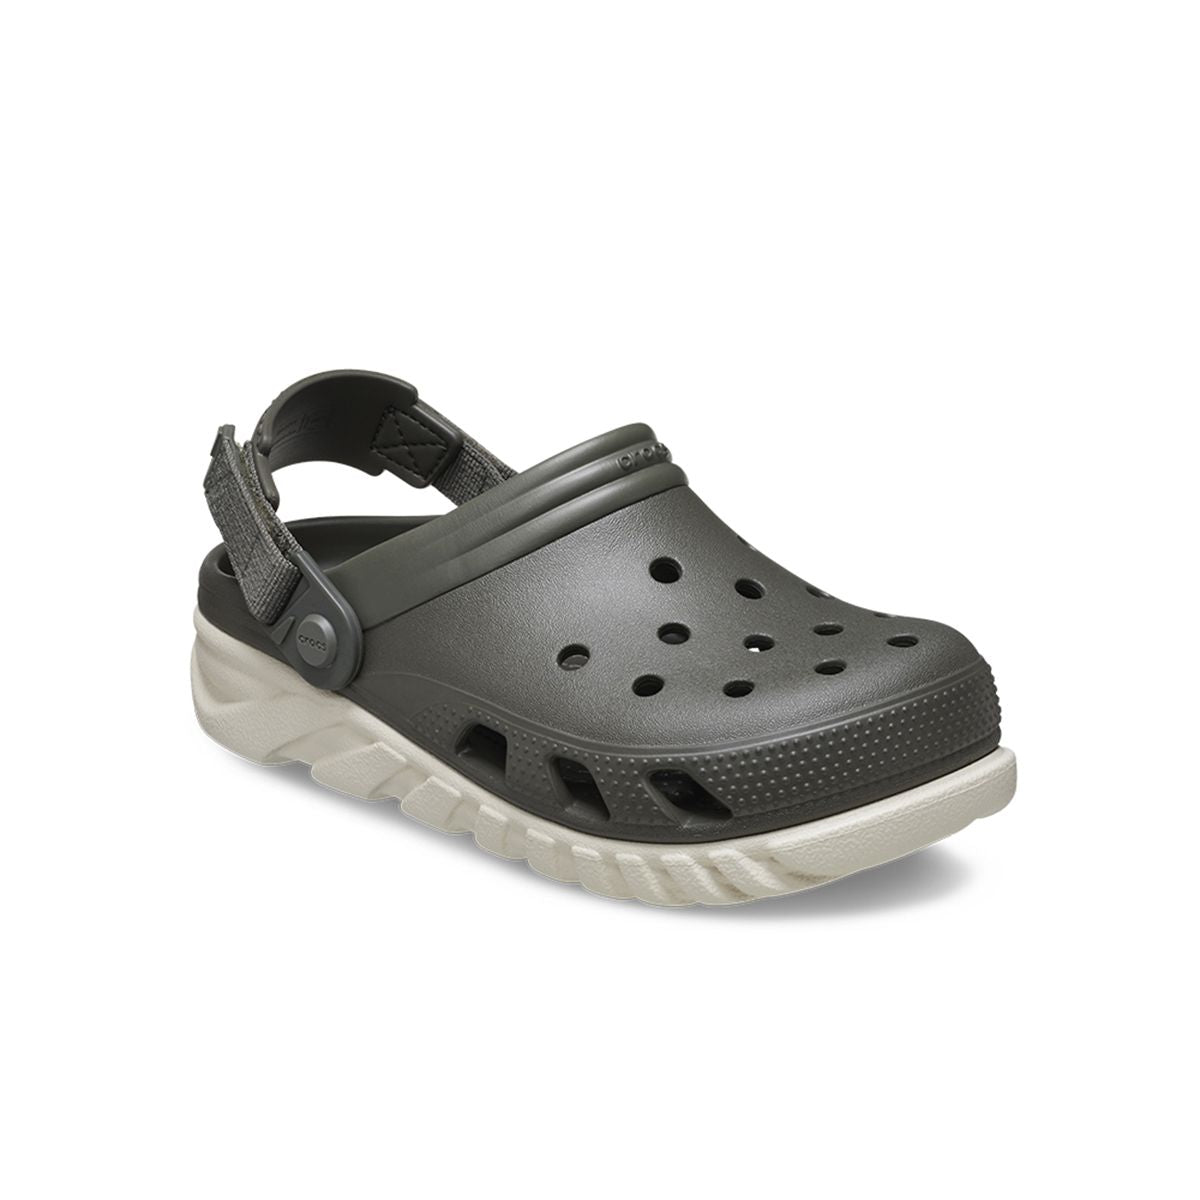 Duet Max II Clog in Dusty Olive Stucco – Crocs Philippines